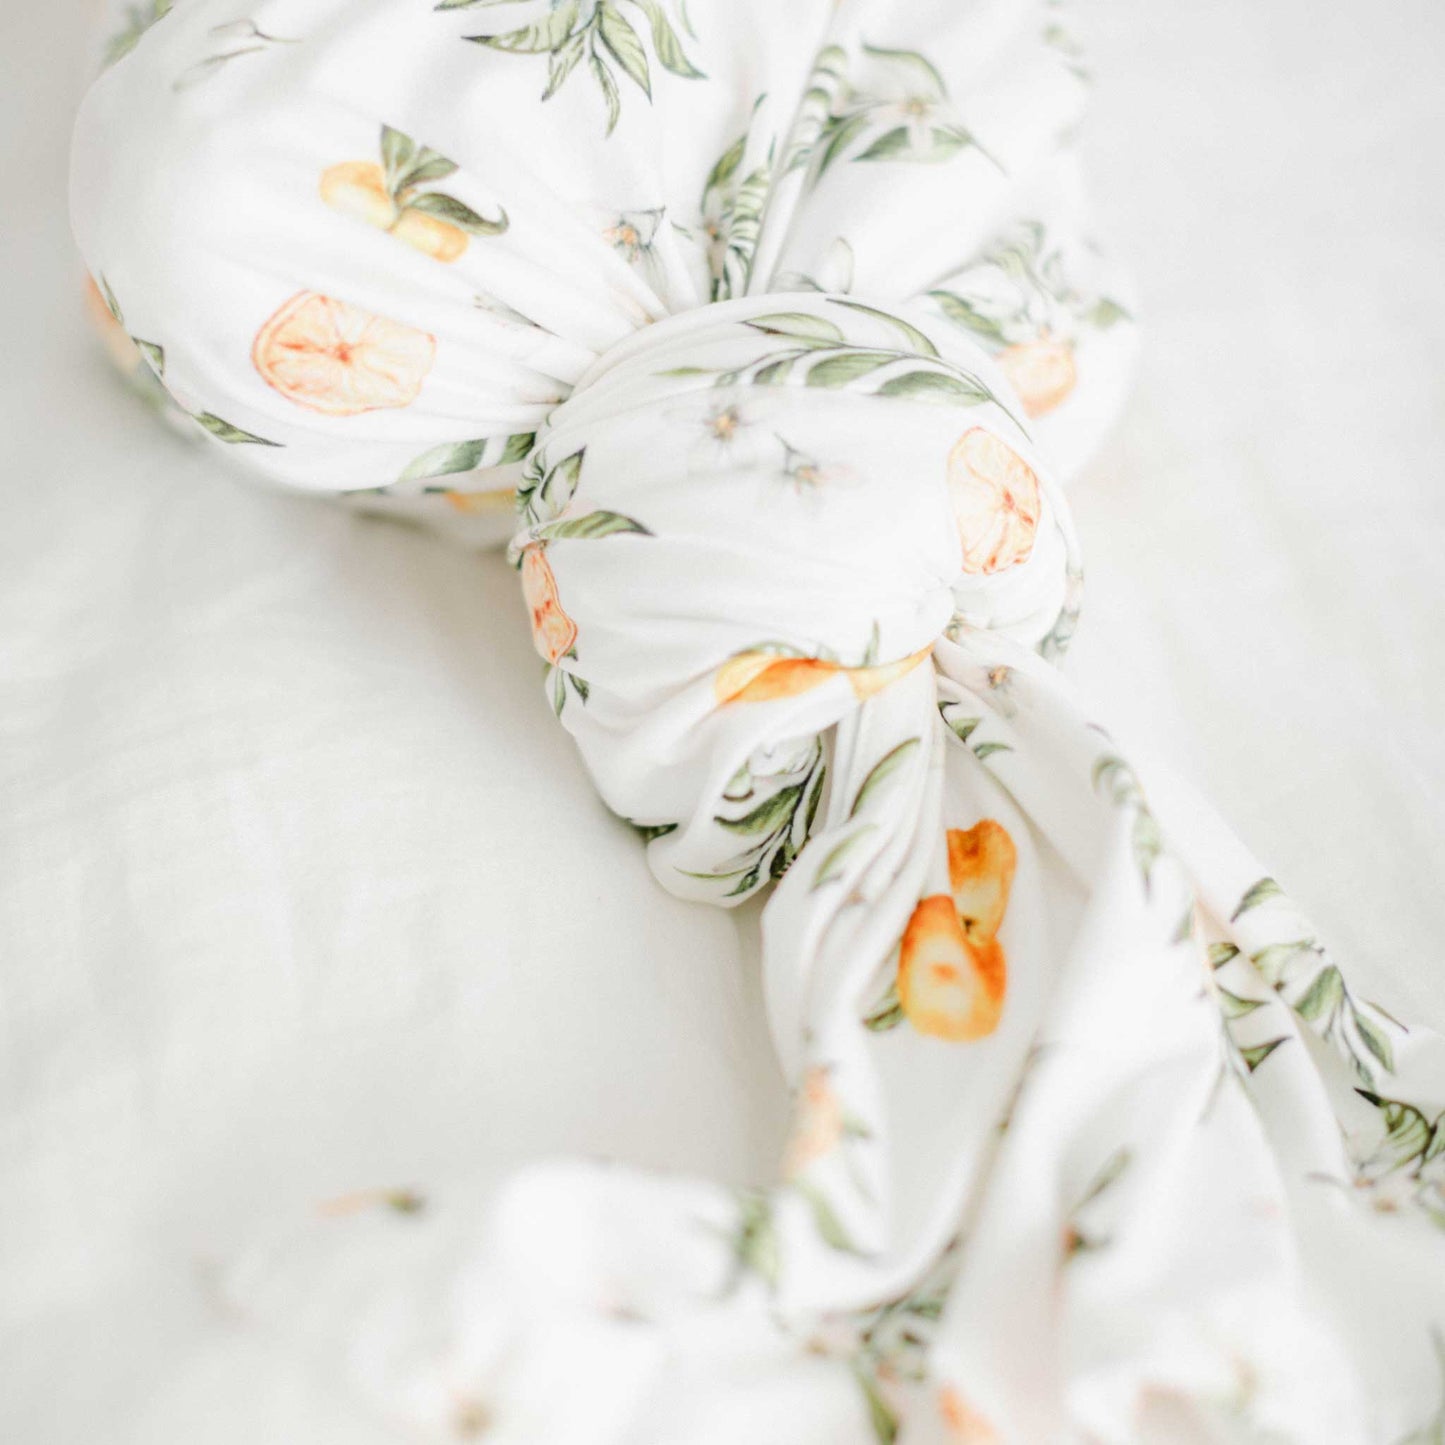 Stretchy Swaddle Blanket - Tangerine by Dolly Lana